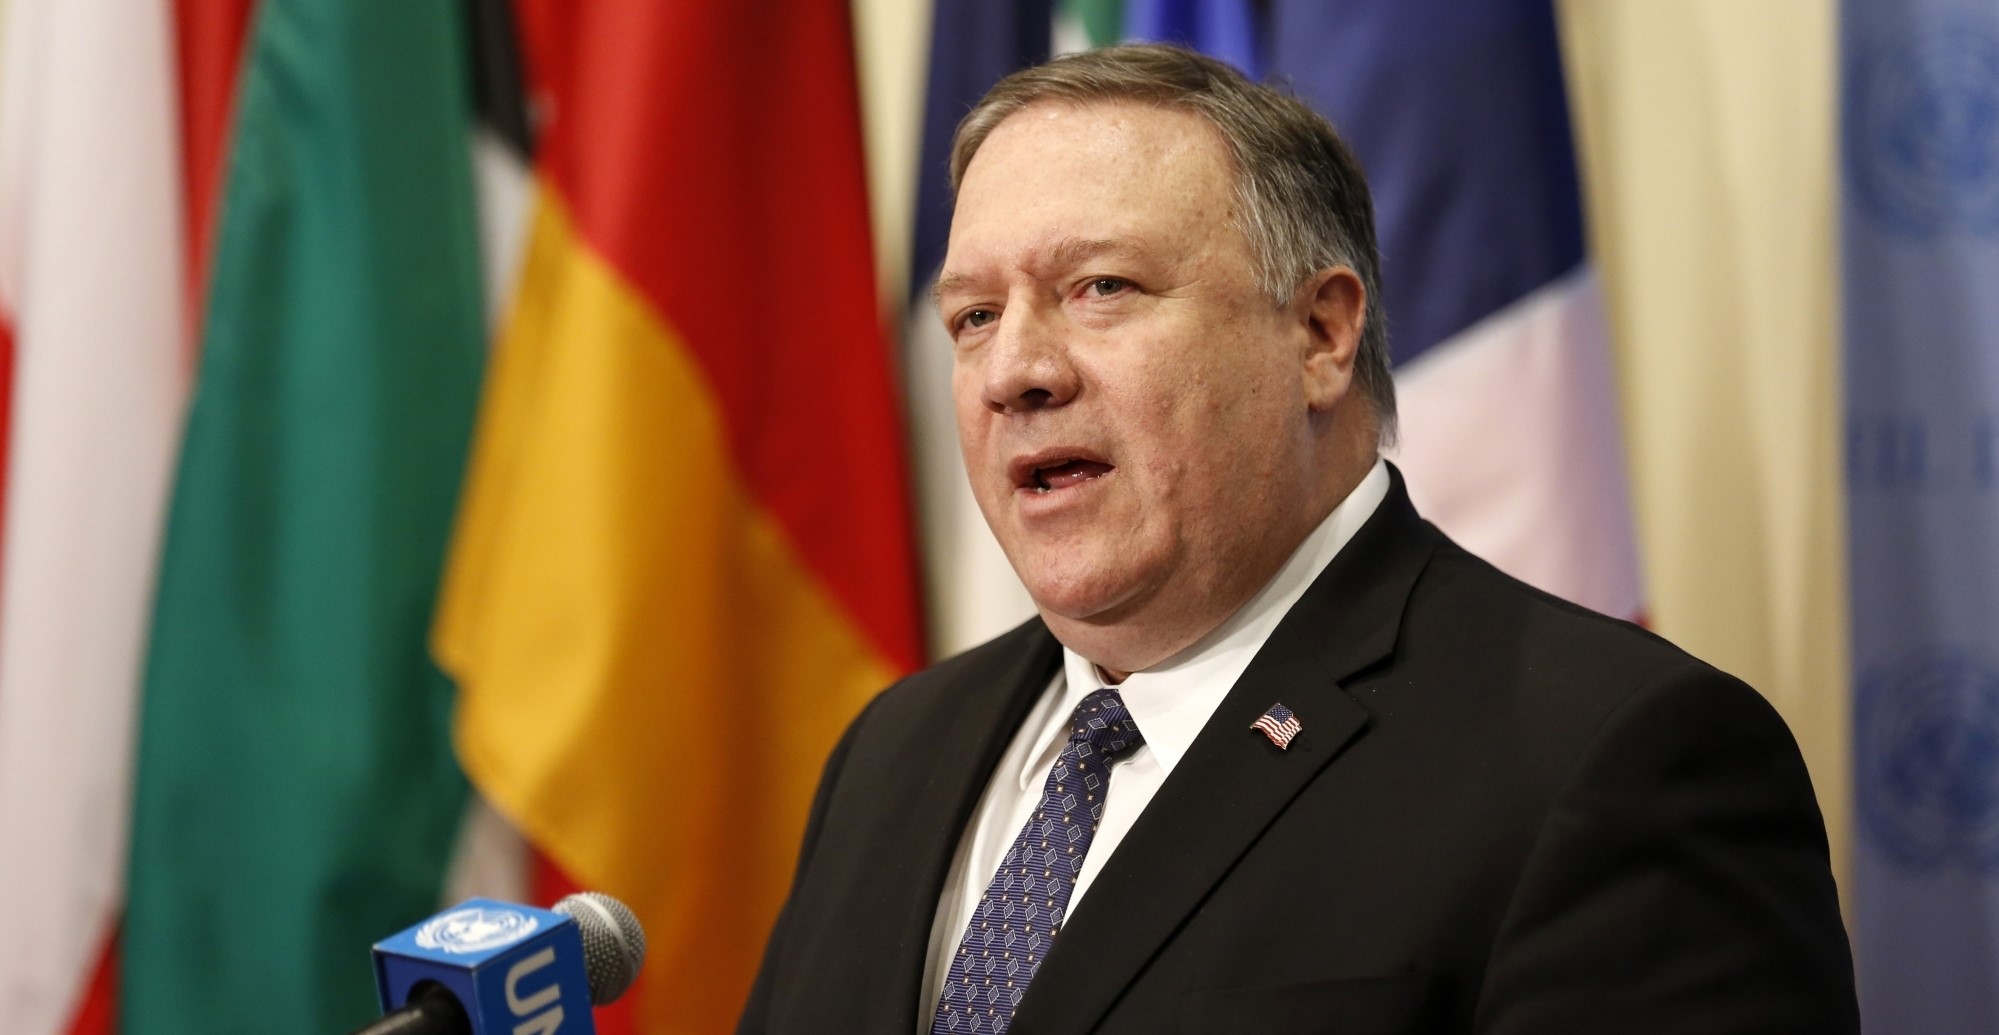 Pompeo expresses outrage to Sisi over death of U.S. citizen